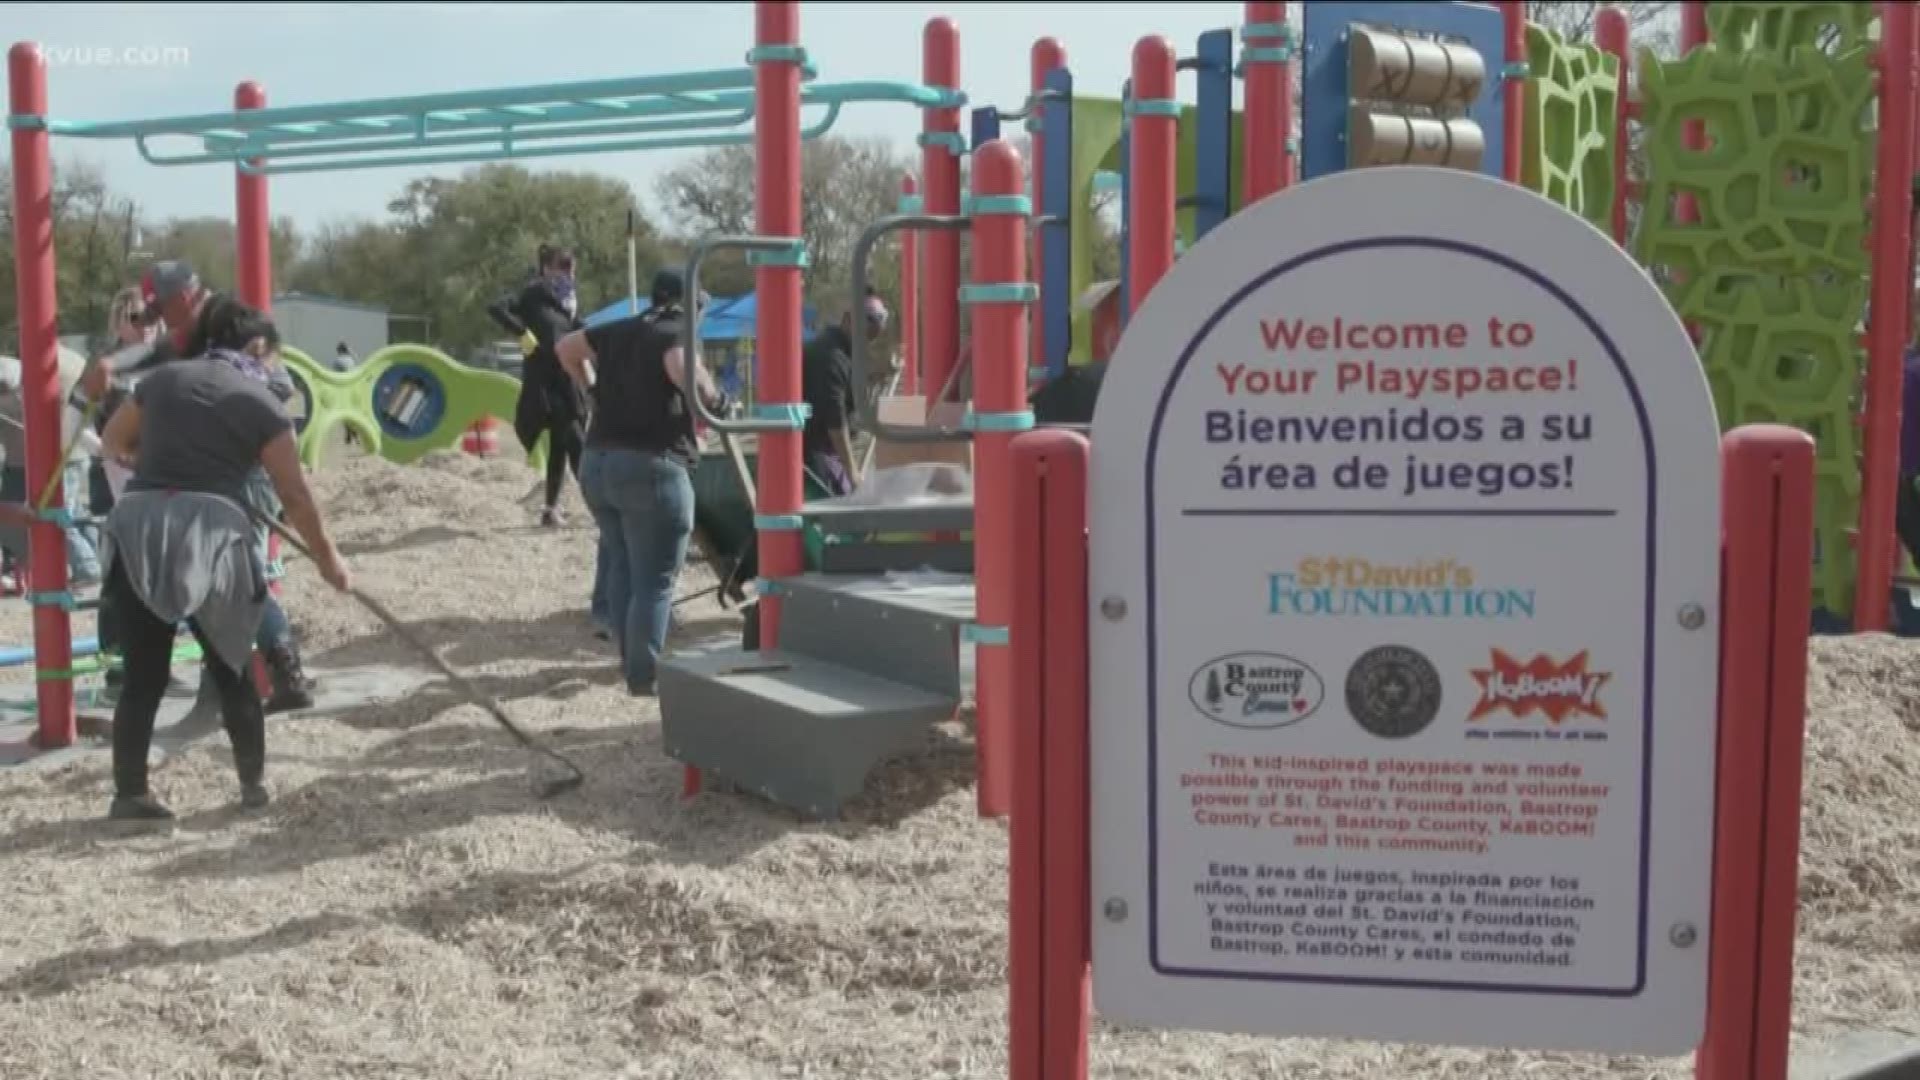 Volunteers worked together to build the new play area near Bluebonnet Elementary.